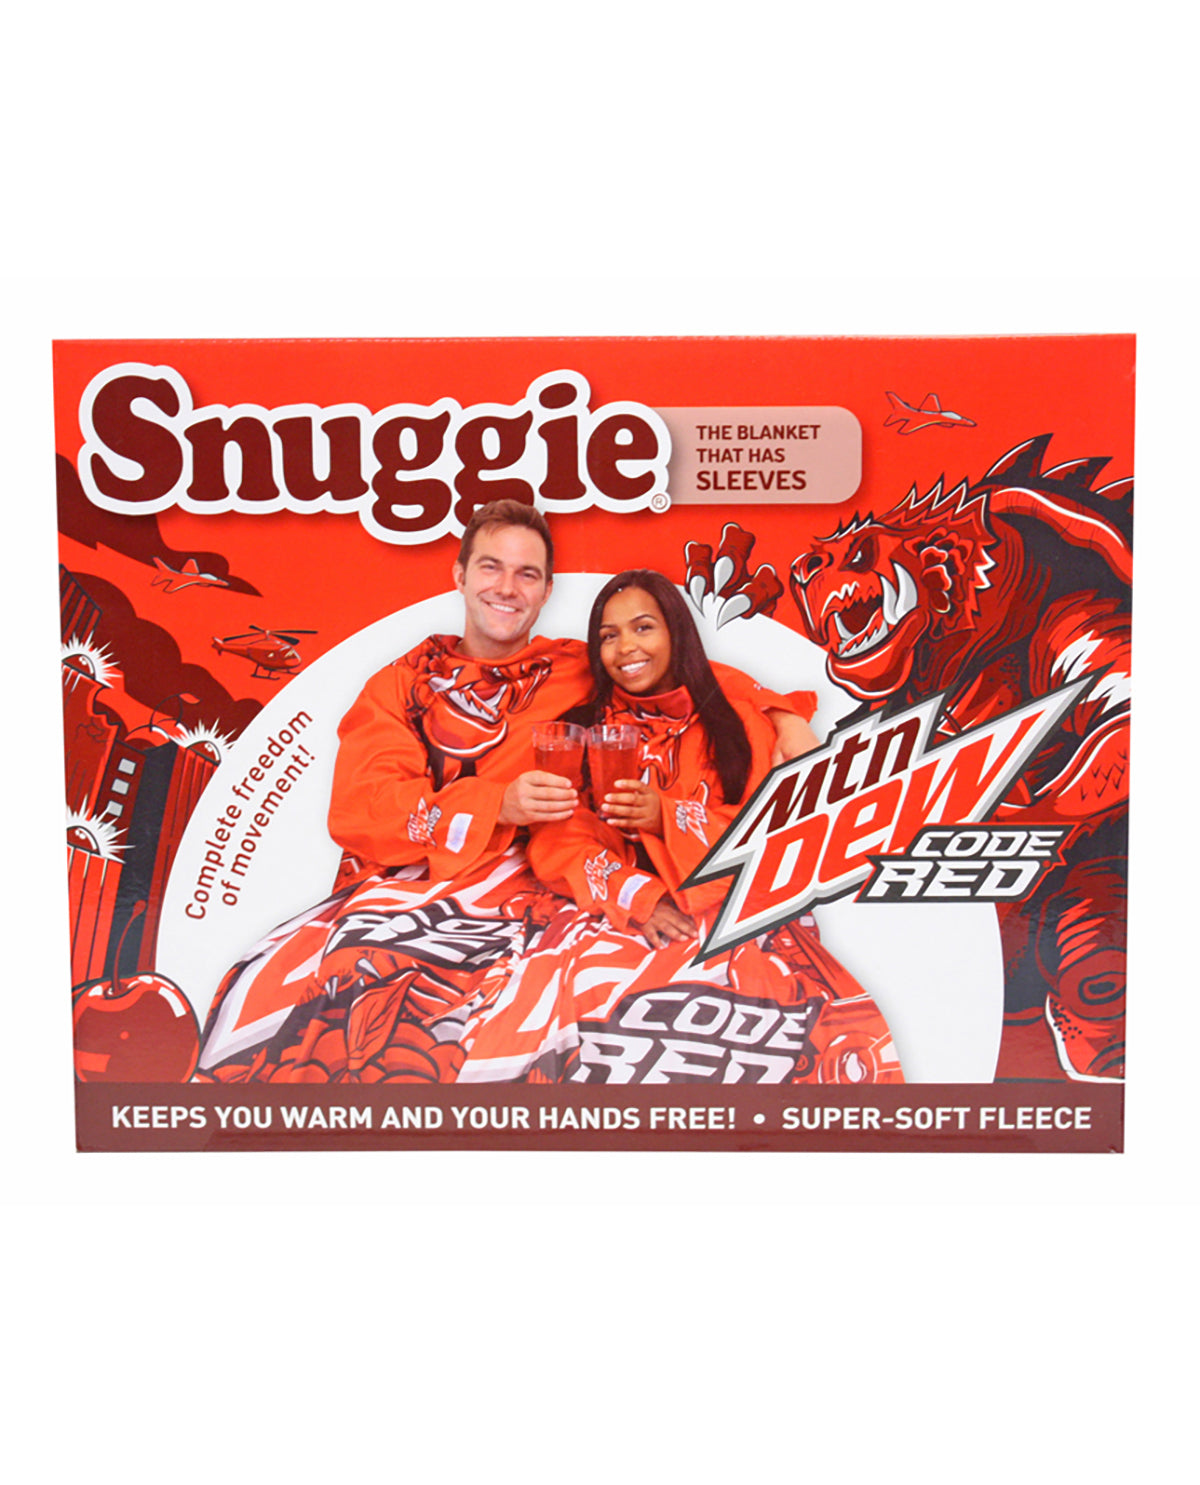 Snuggies Mountain Dew Code Red